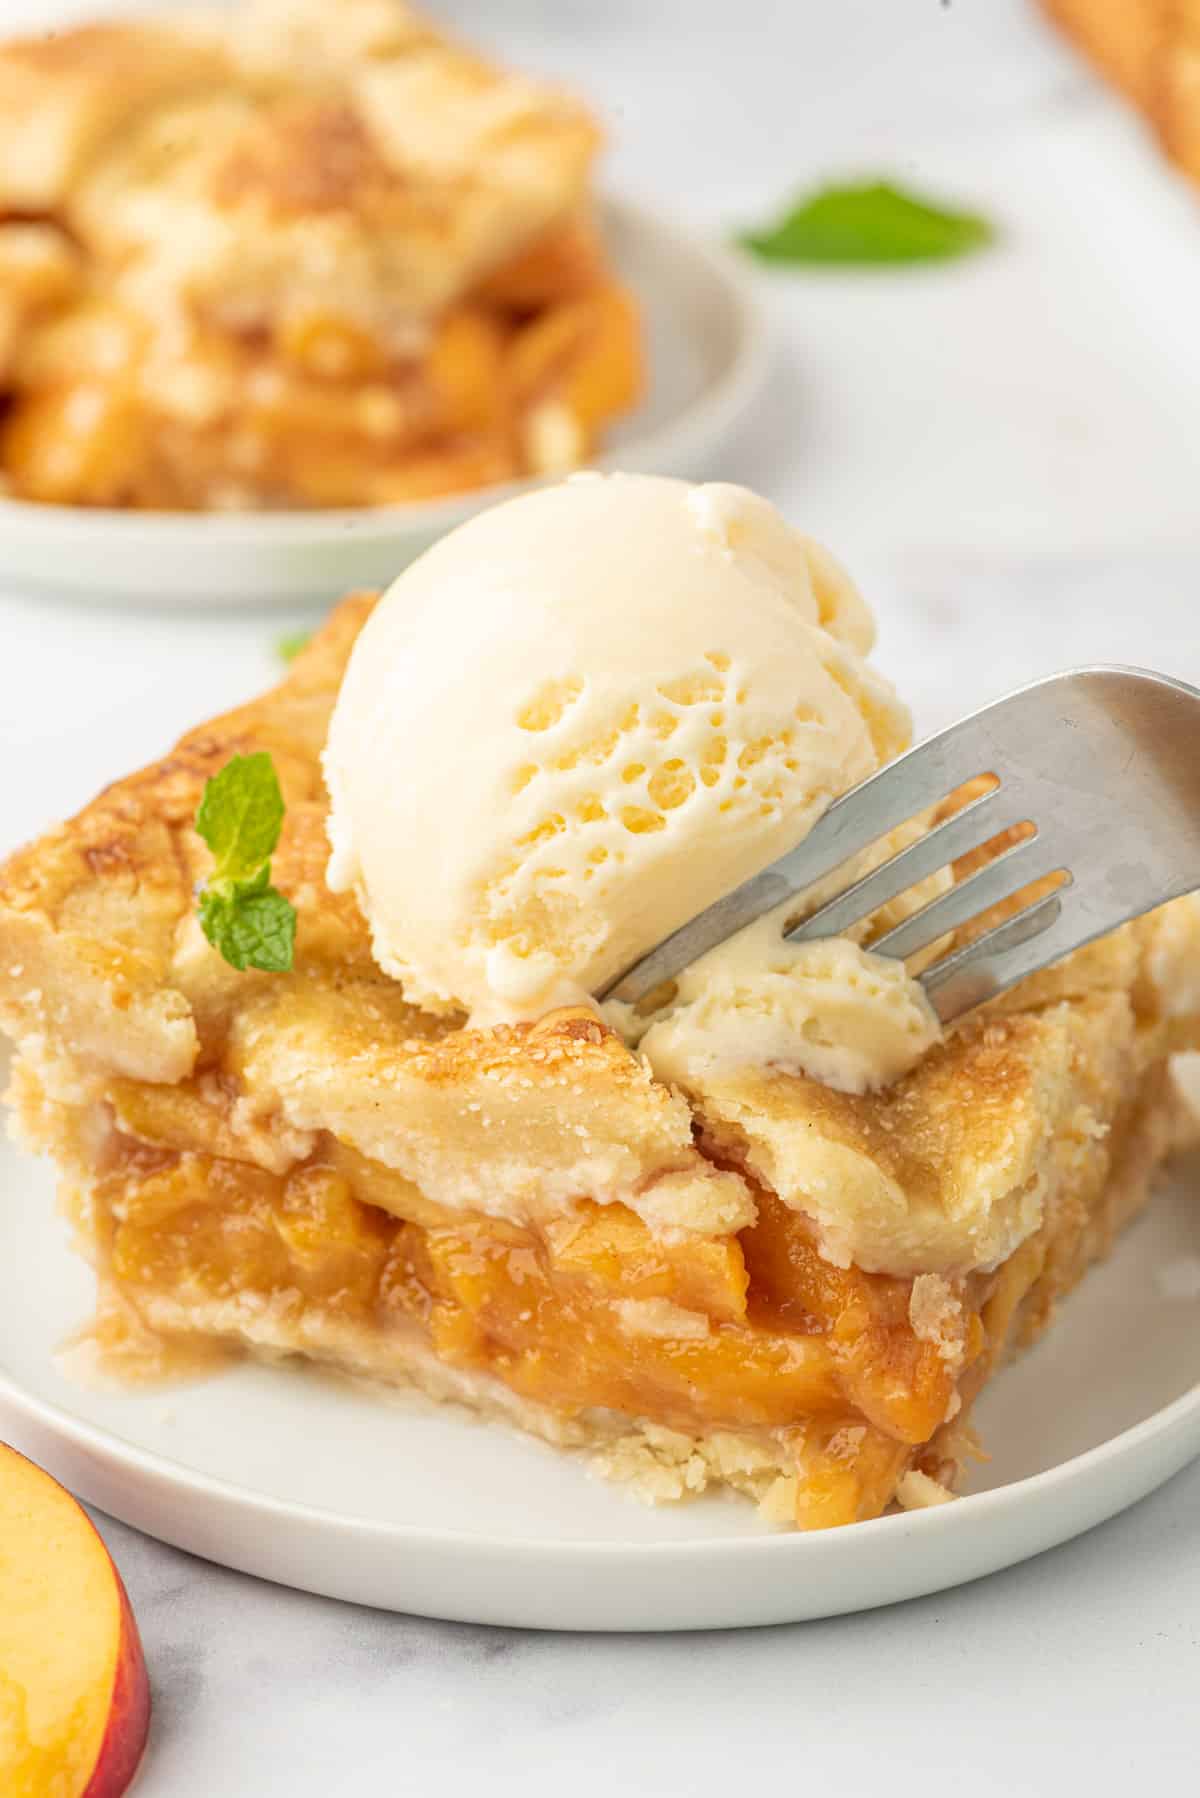 A piece of pie is being eaten with a fork. There's a scoop of vanilla ice cream on top.